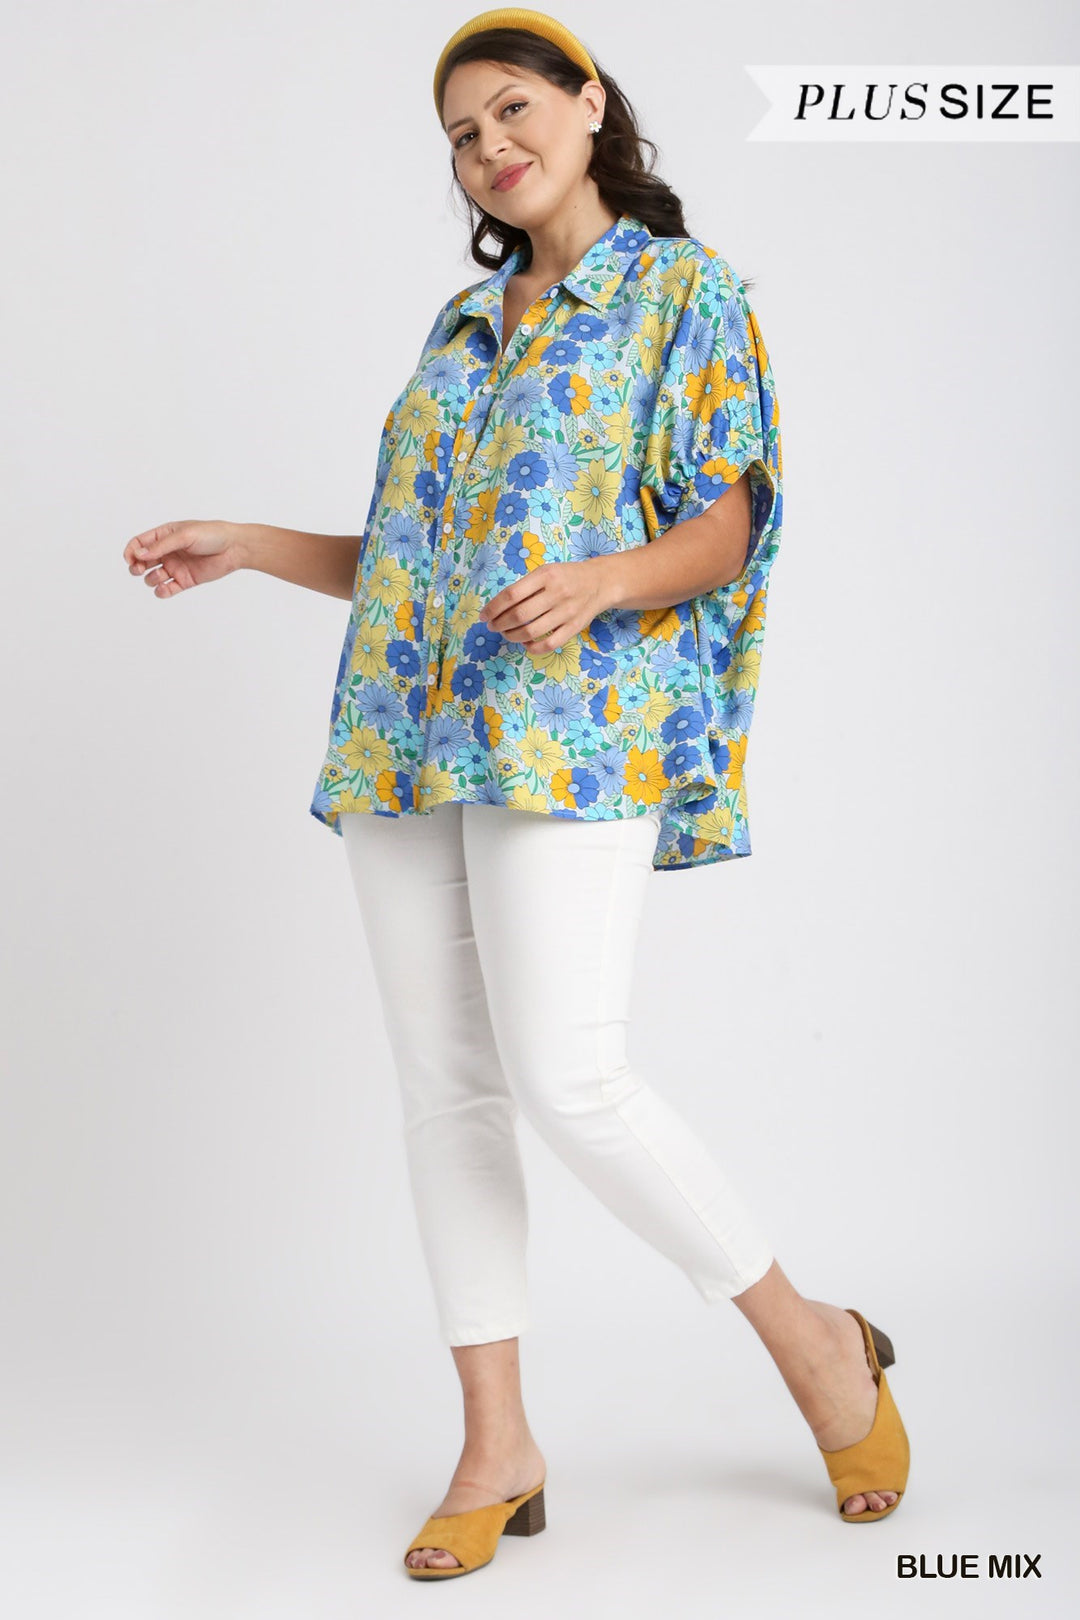 Blue Flower Print Boxy Cut Button Down Collared Top with Short Dolman Sleeve - Available Small Through Extended Sizes